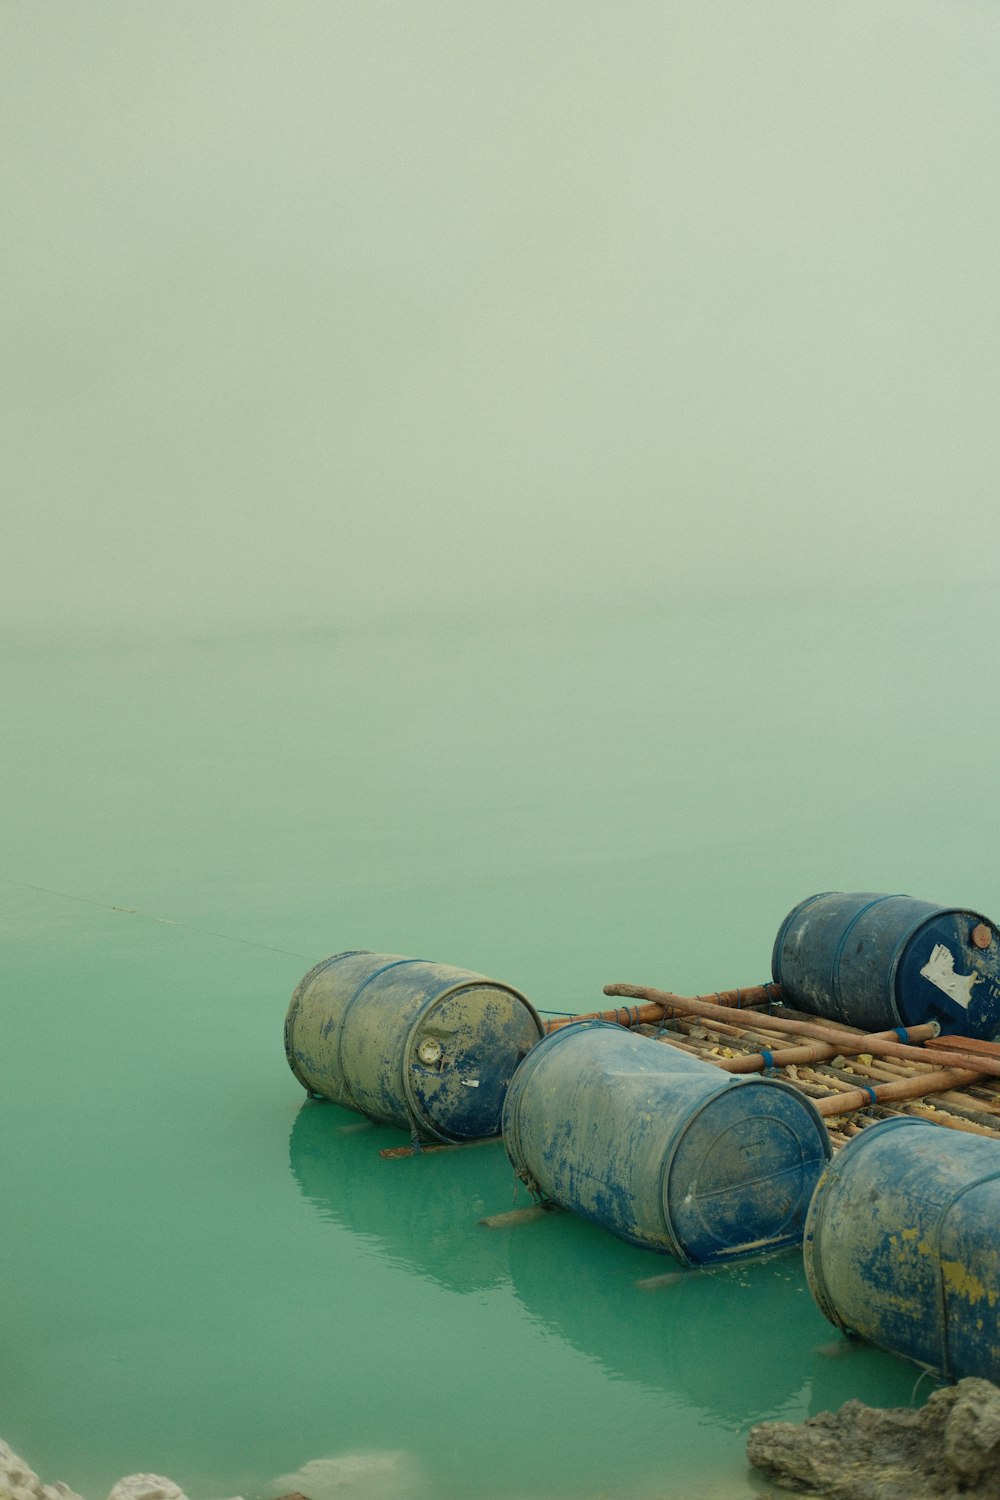 a group of barrels sitting on top of a body of water